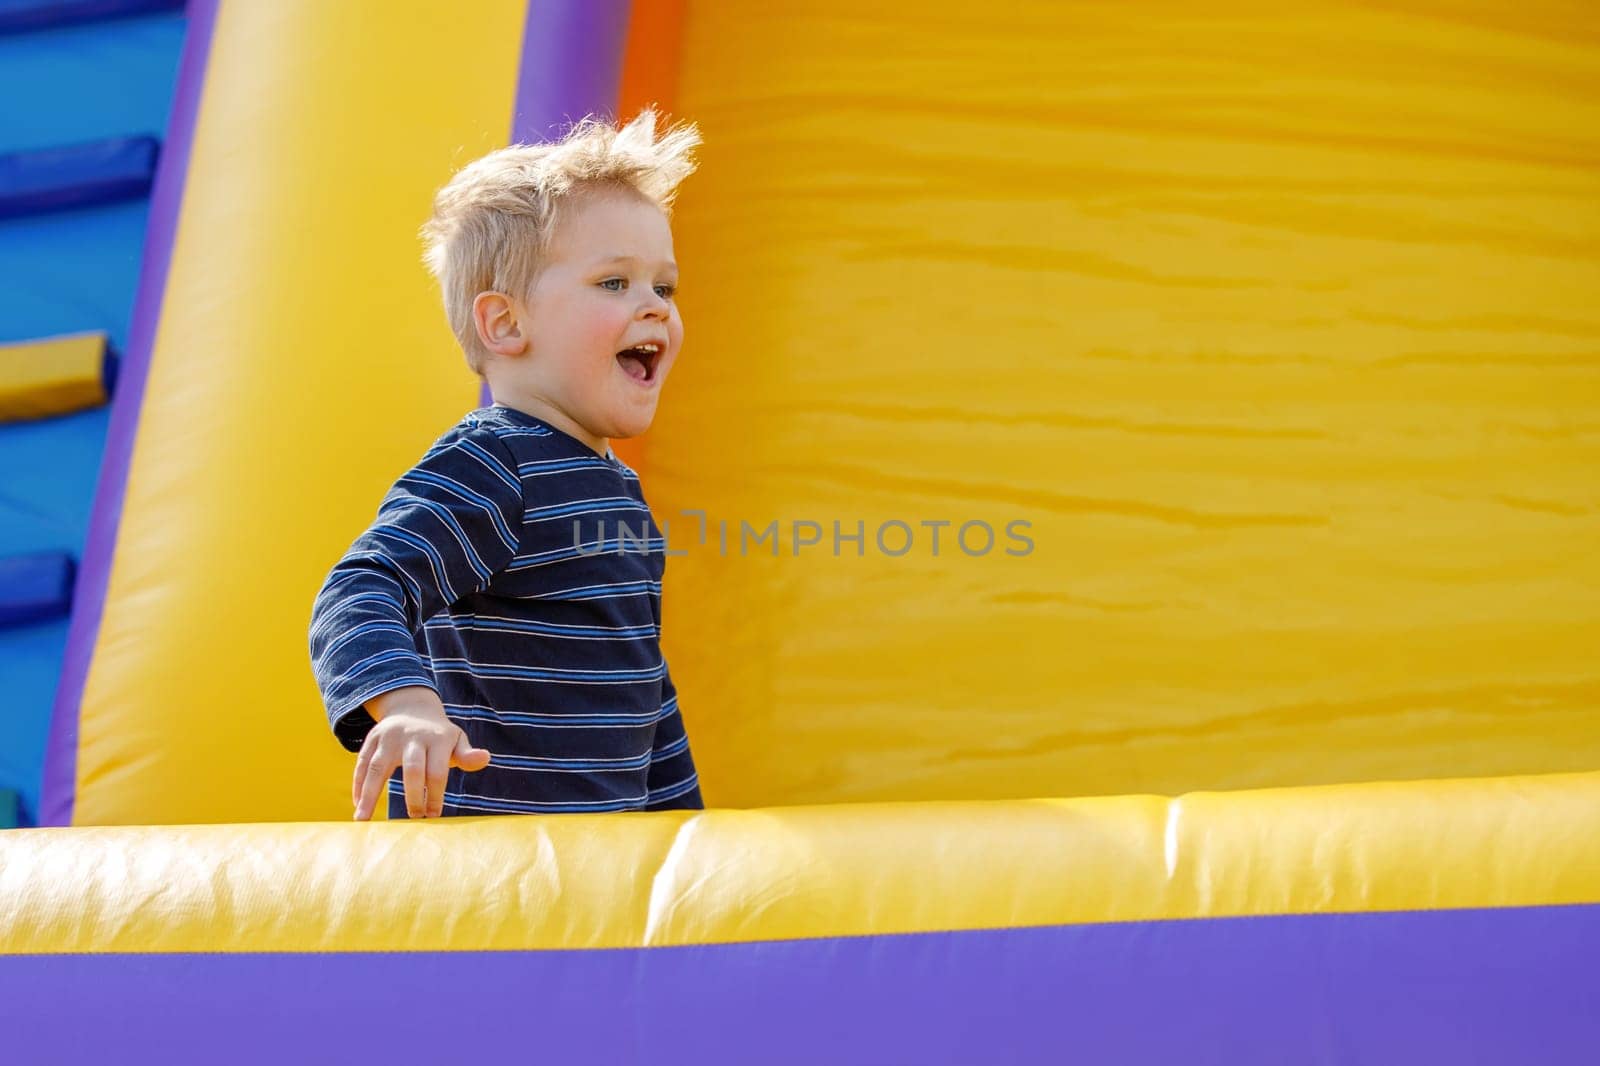 Little cool boy have fun and raging on an yellow inflatable trampoline. There is free space for text in the image.